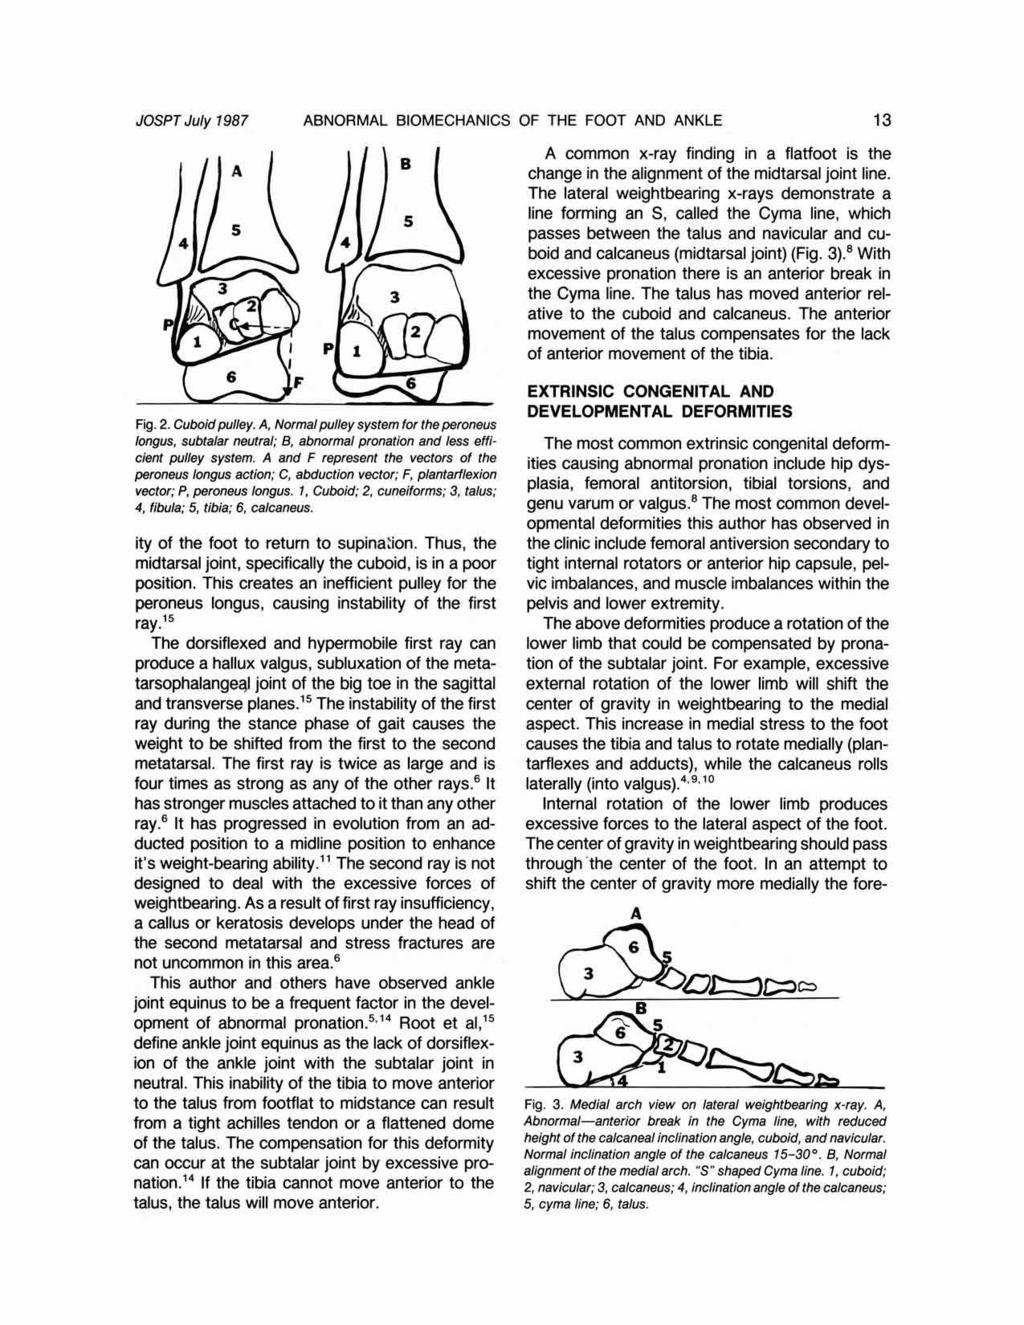 JOSPT July 1987 ABNORMAL BIOMECHANICS OF THE FOOT AND ANKLE 13 A common x-ray finding in a flatfoot is the change in the alignment of the midtarsal joint line.